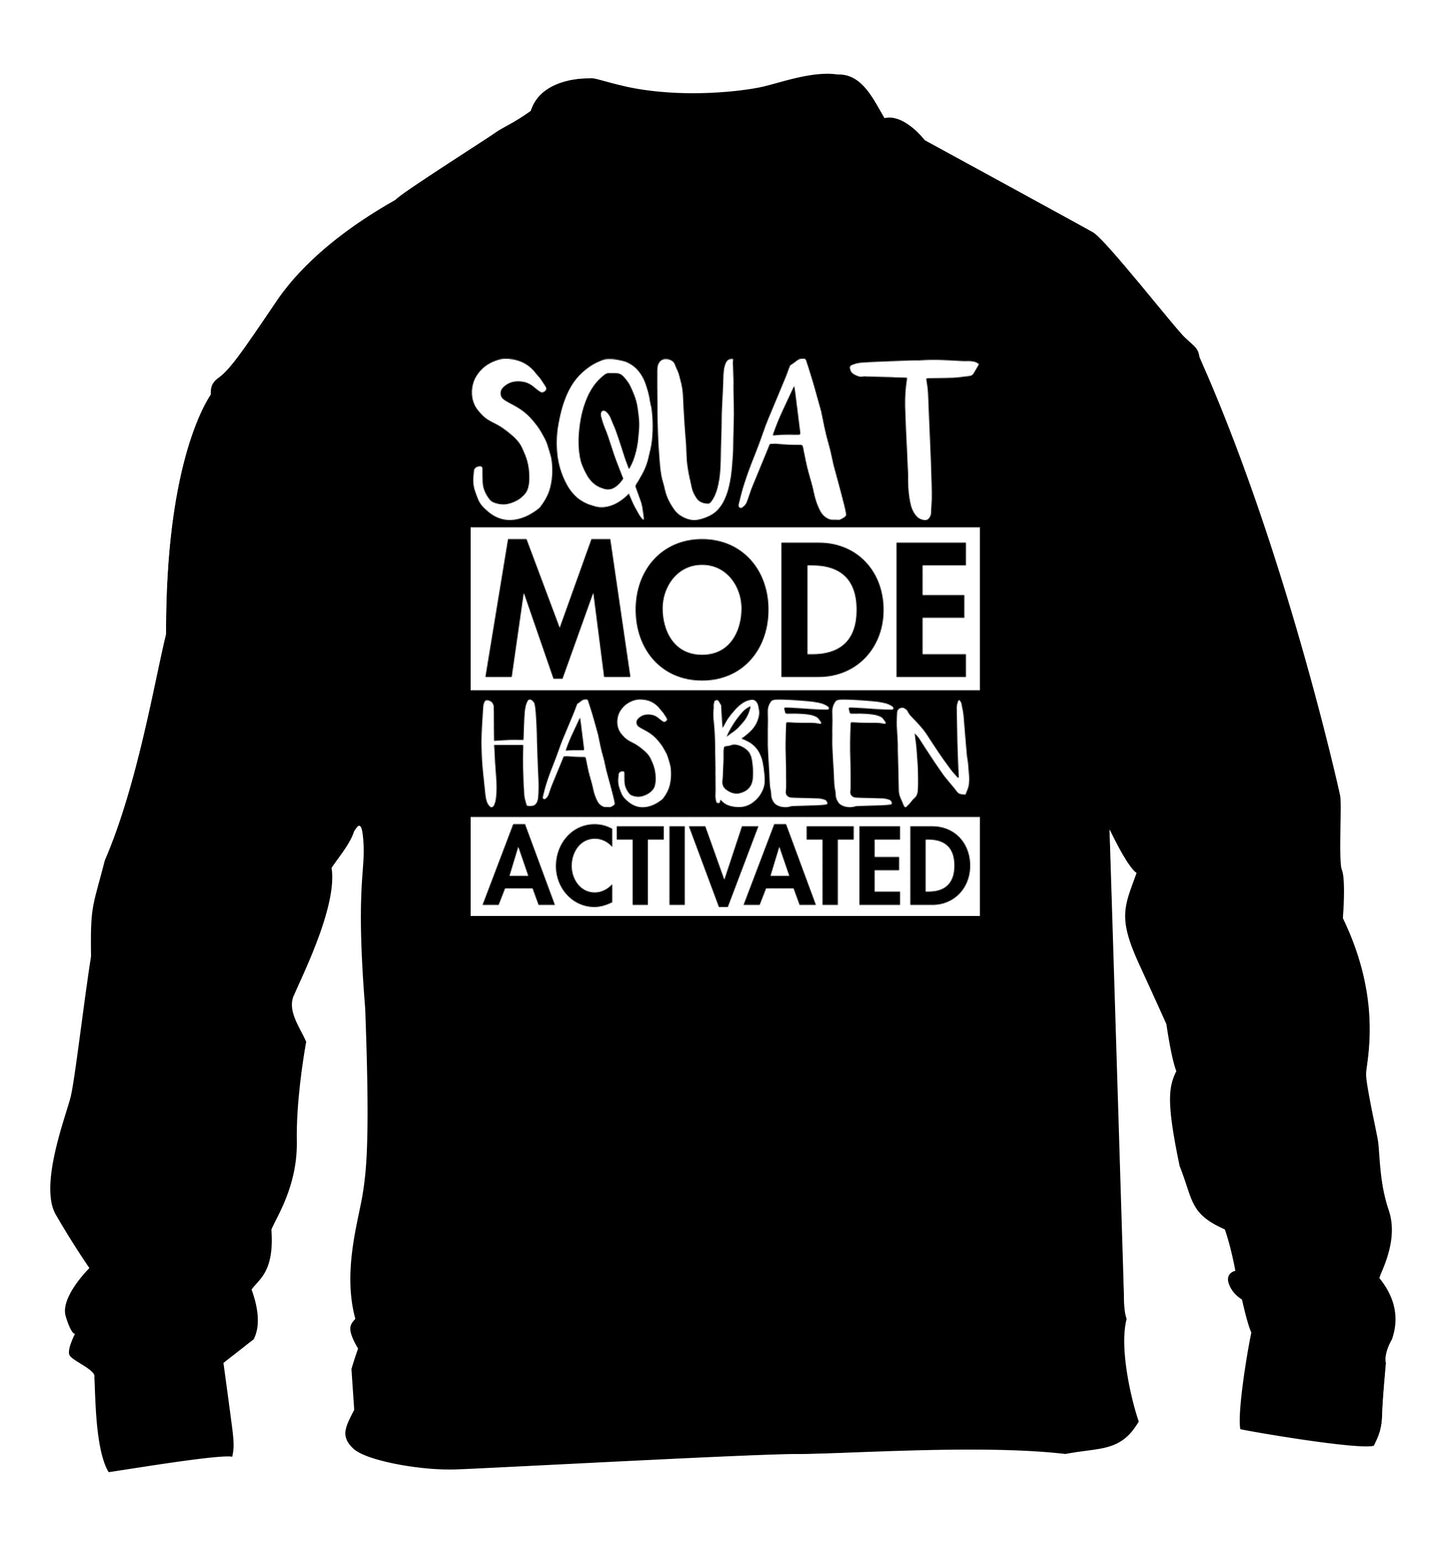 Squat mode activated children's black sweater 12-14 Years